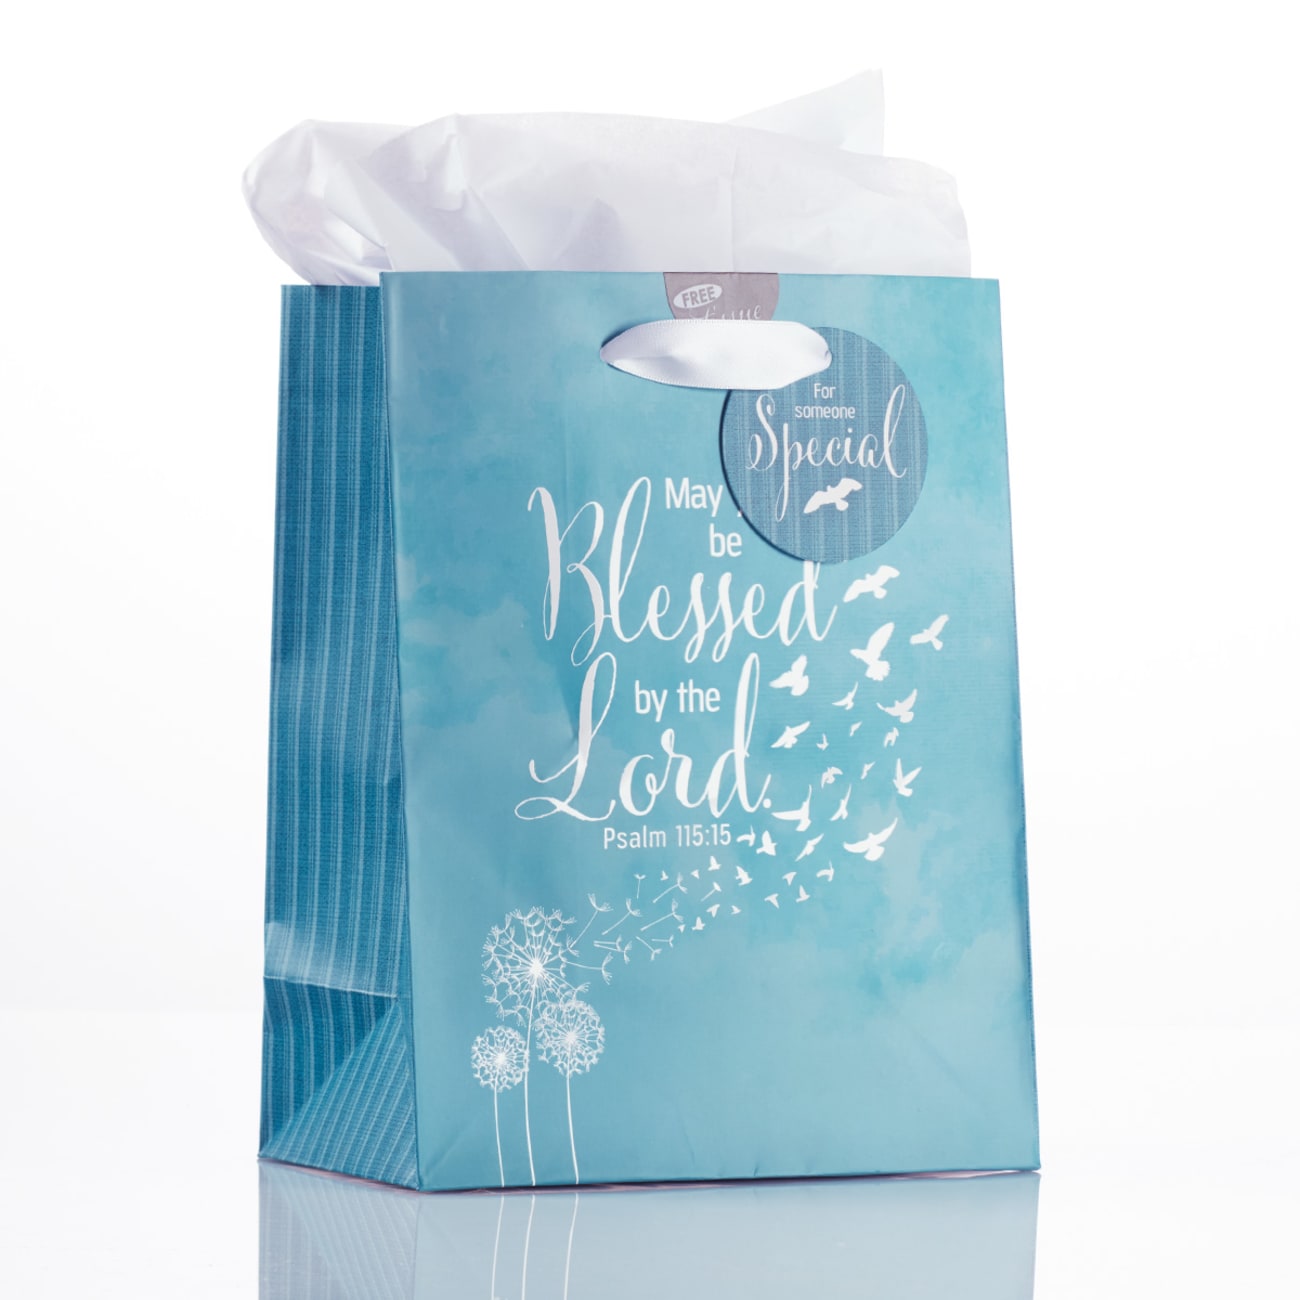 Gift Bag Medium: Soar, Blue/White Incl Tissue Paper and Gift Tag (Isaiah 40:31) Stationery